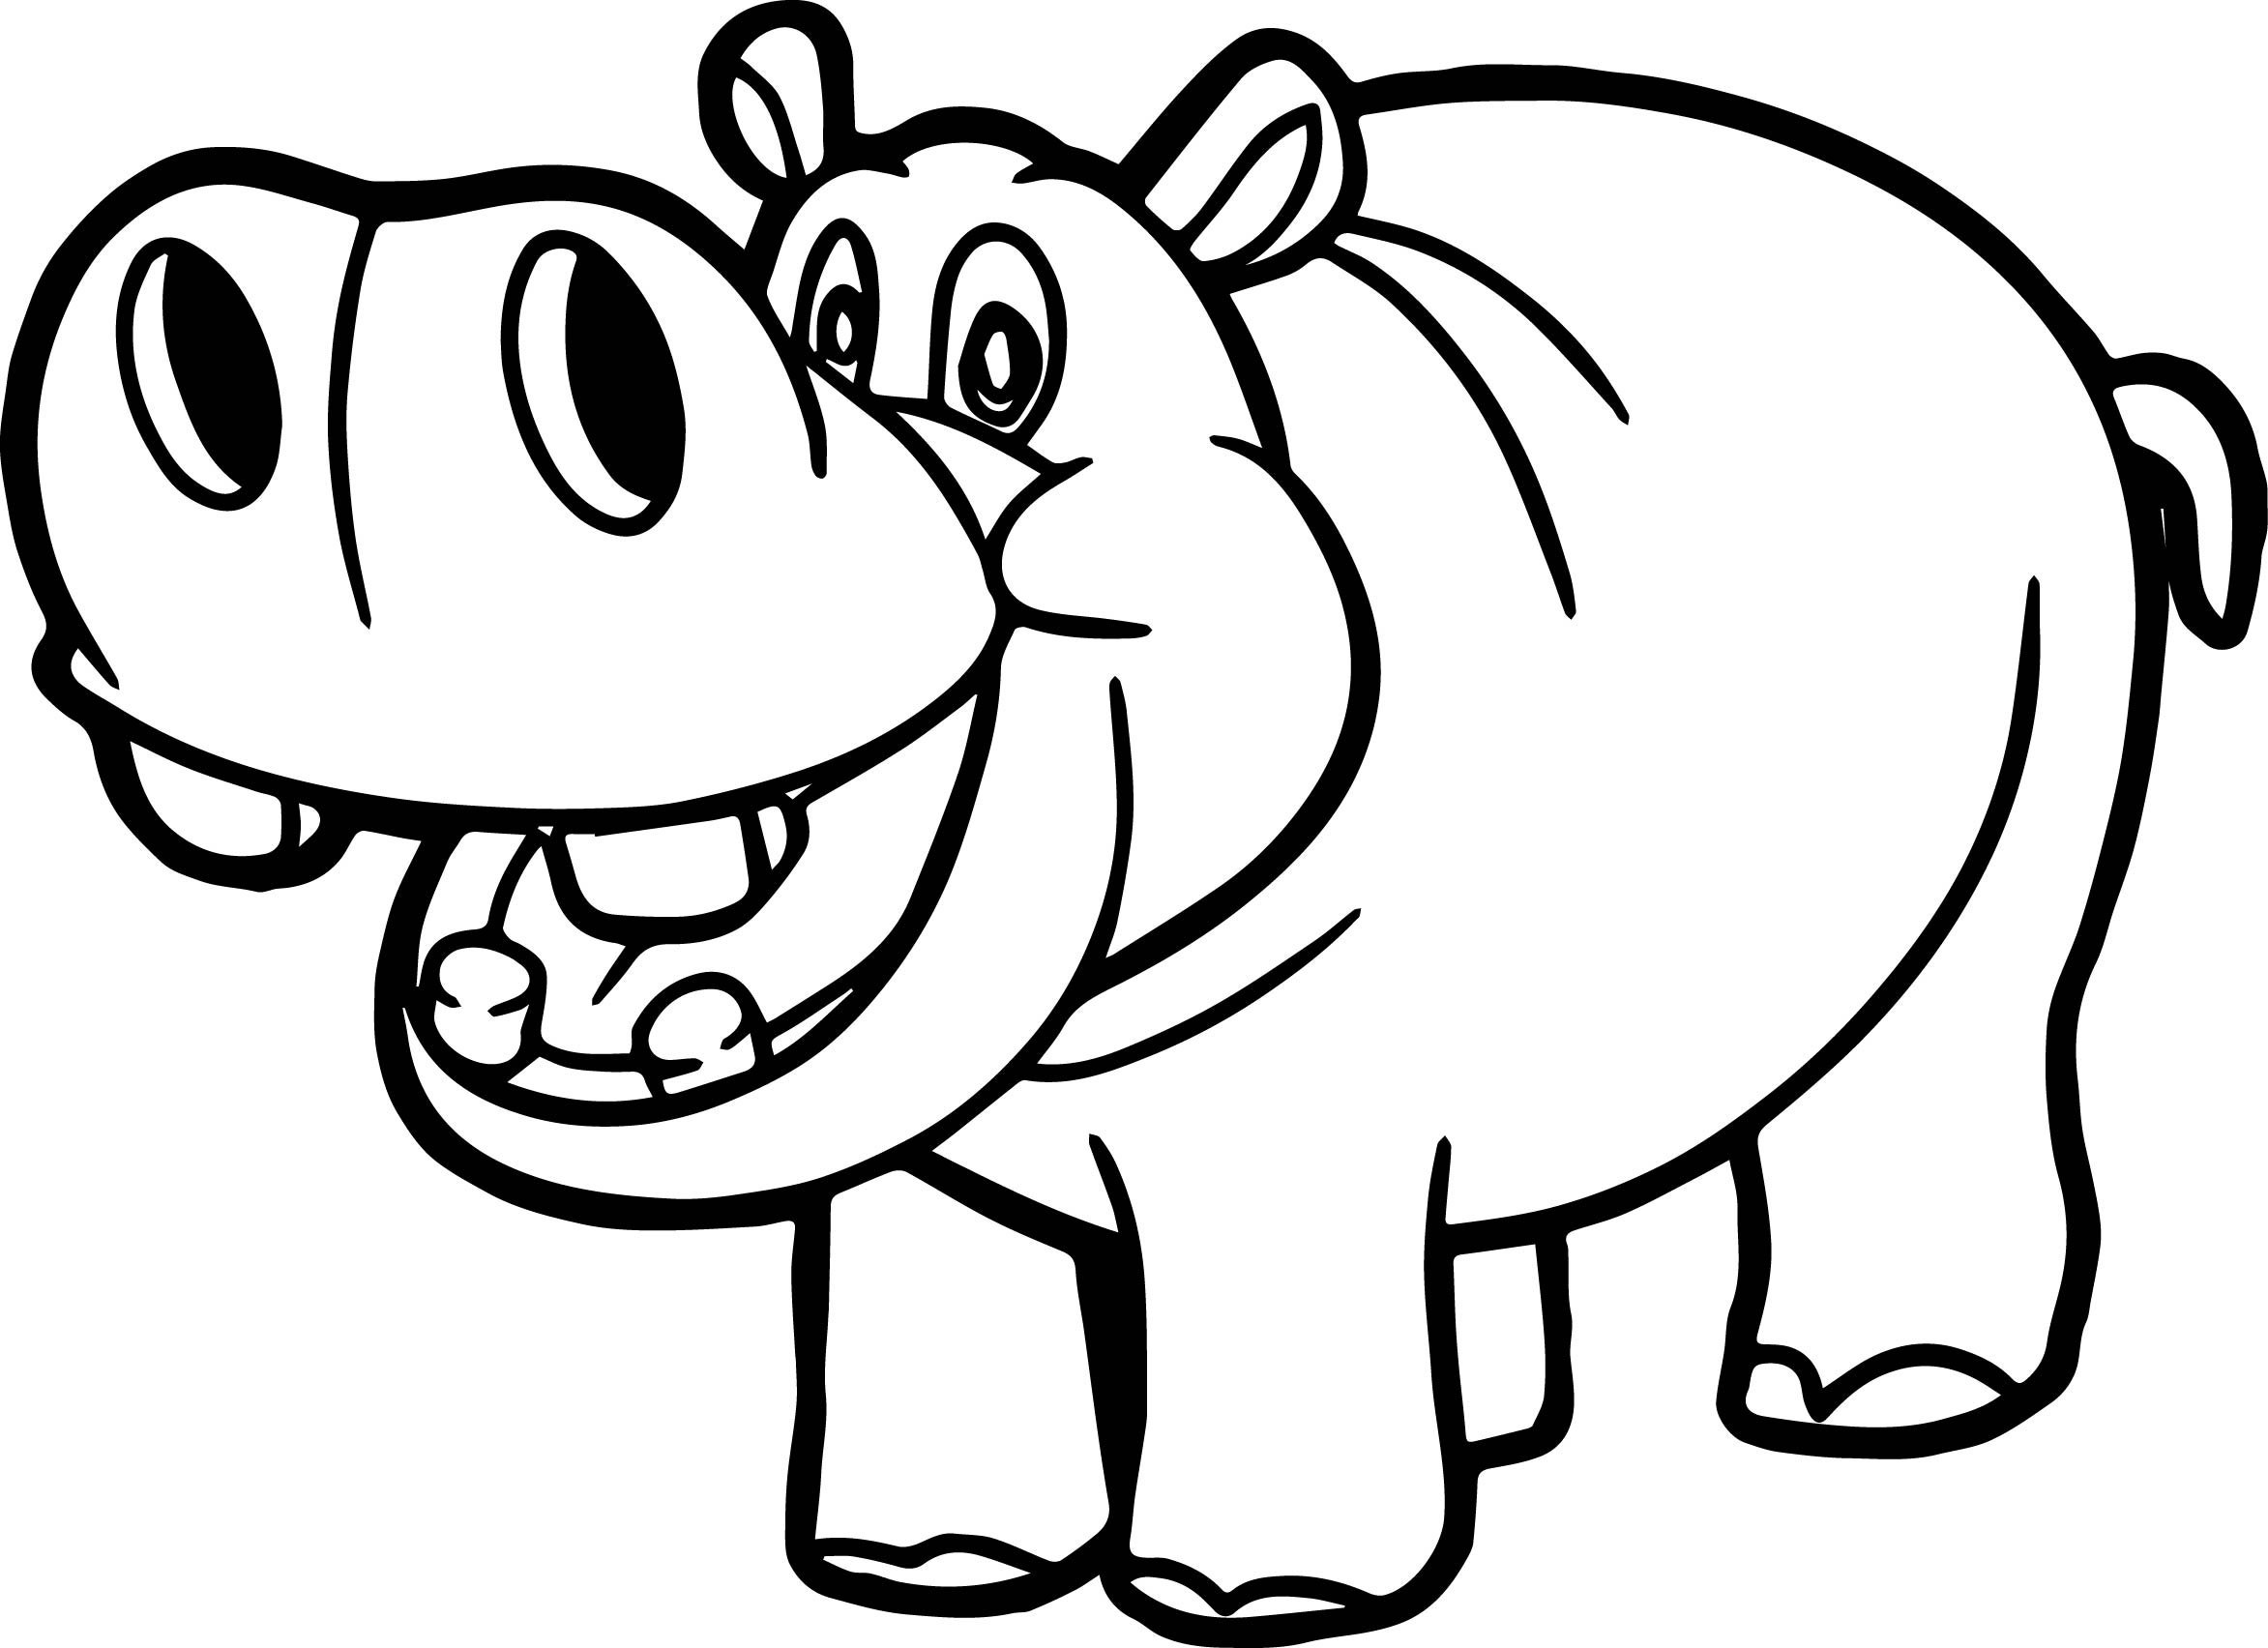 hippopotamuses coloring pages luxury hippo outline drawing at getdrawings